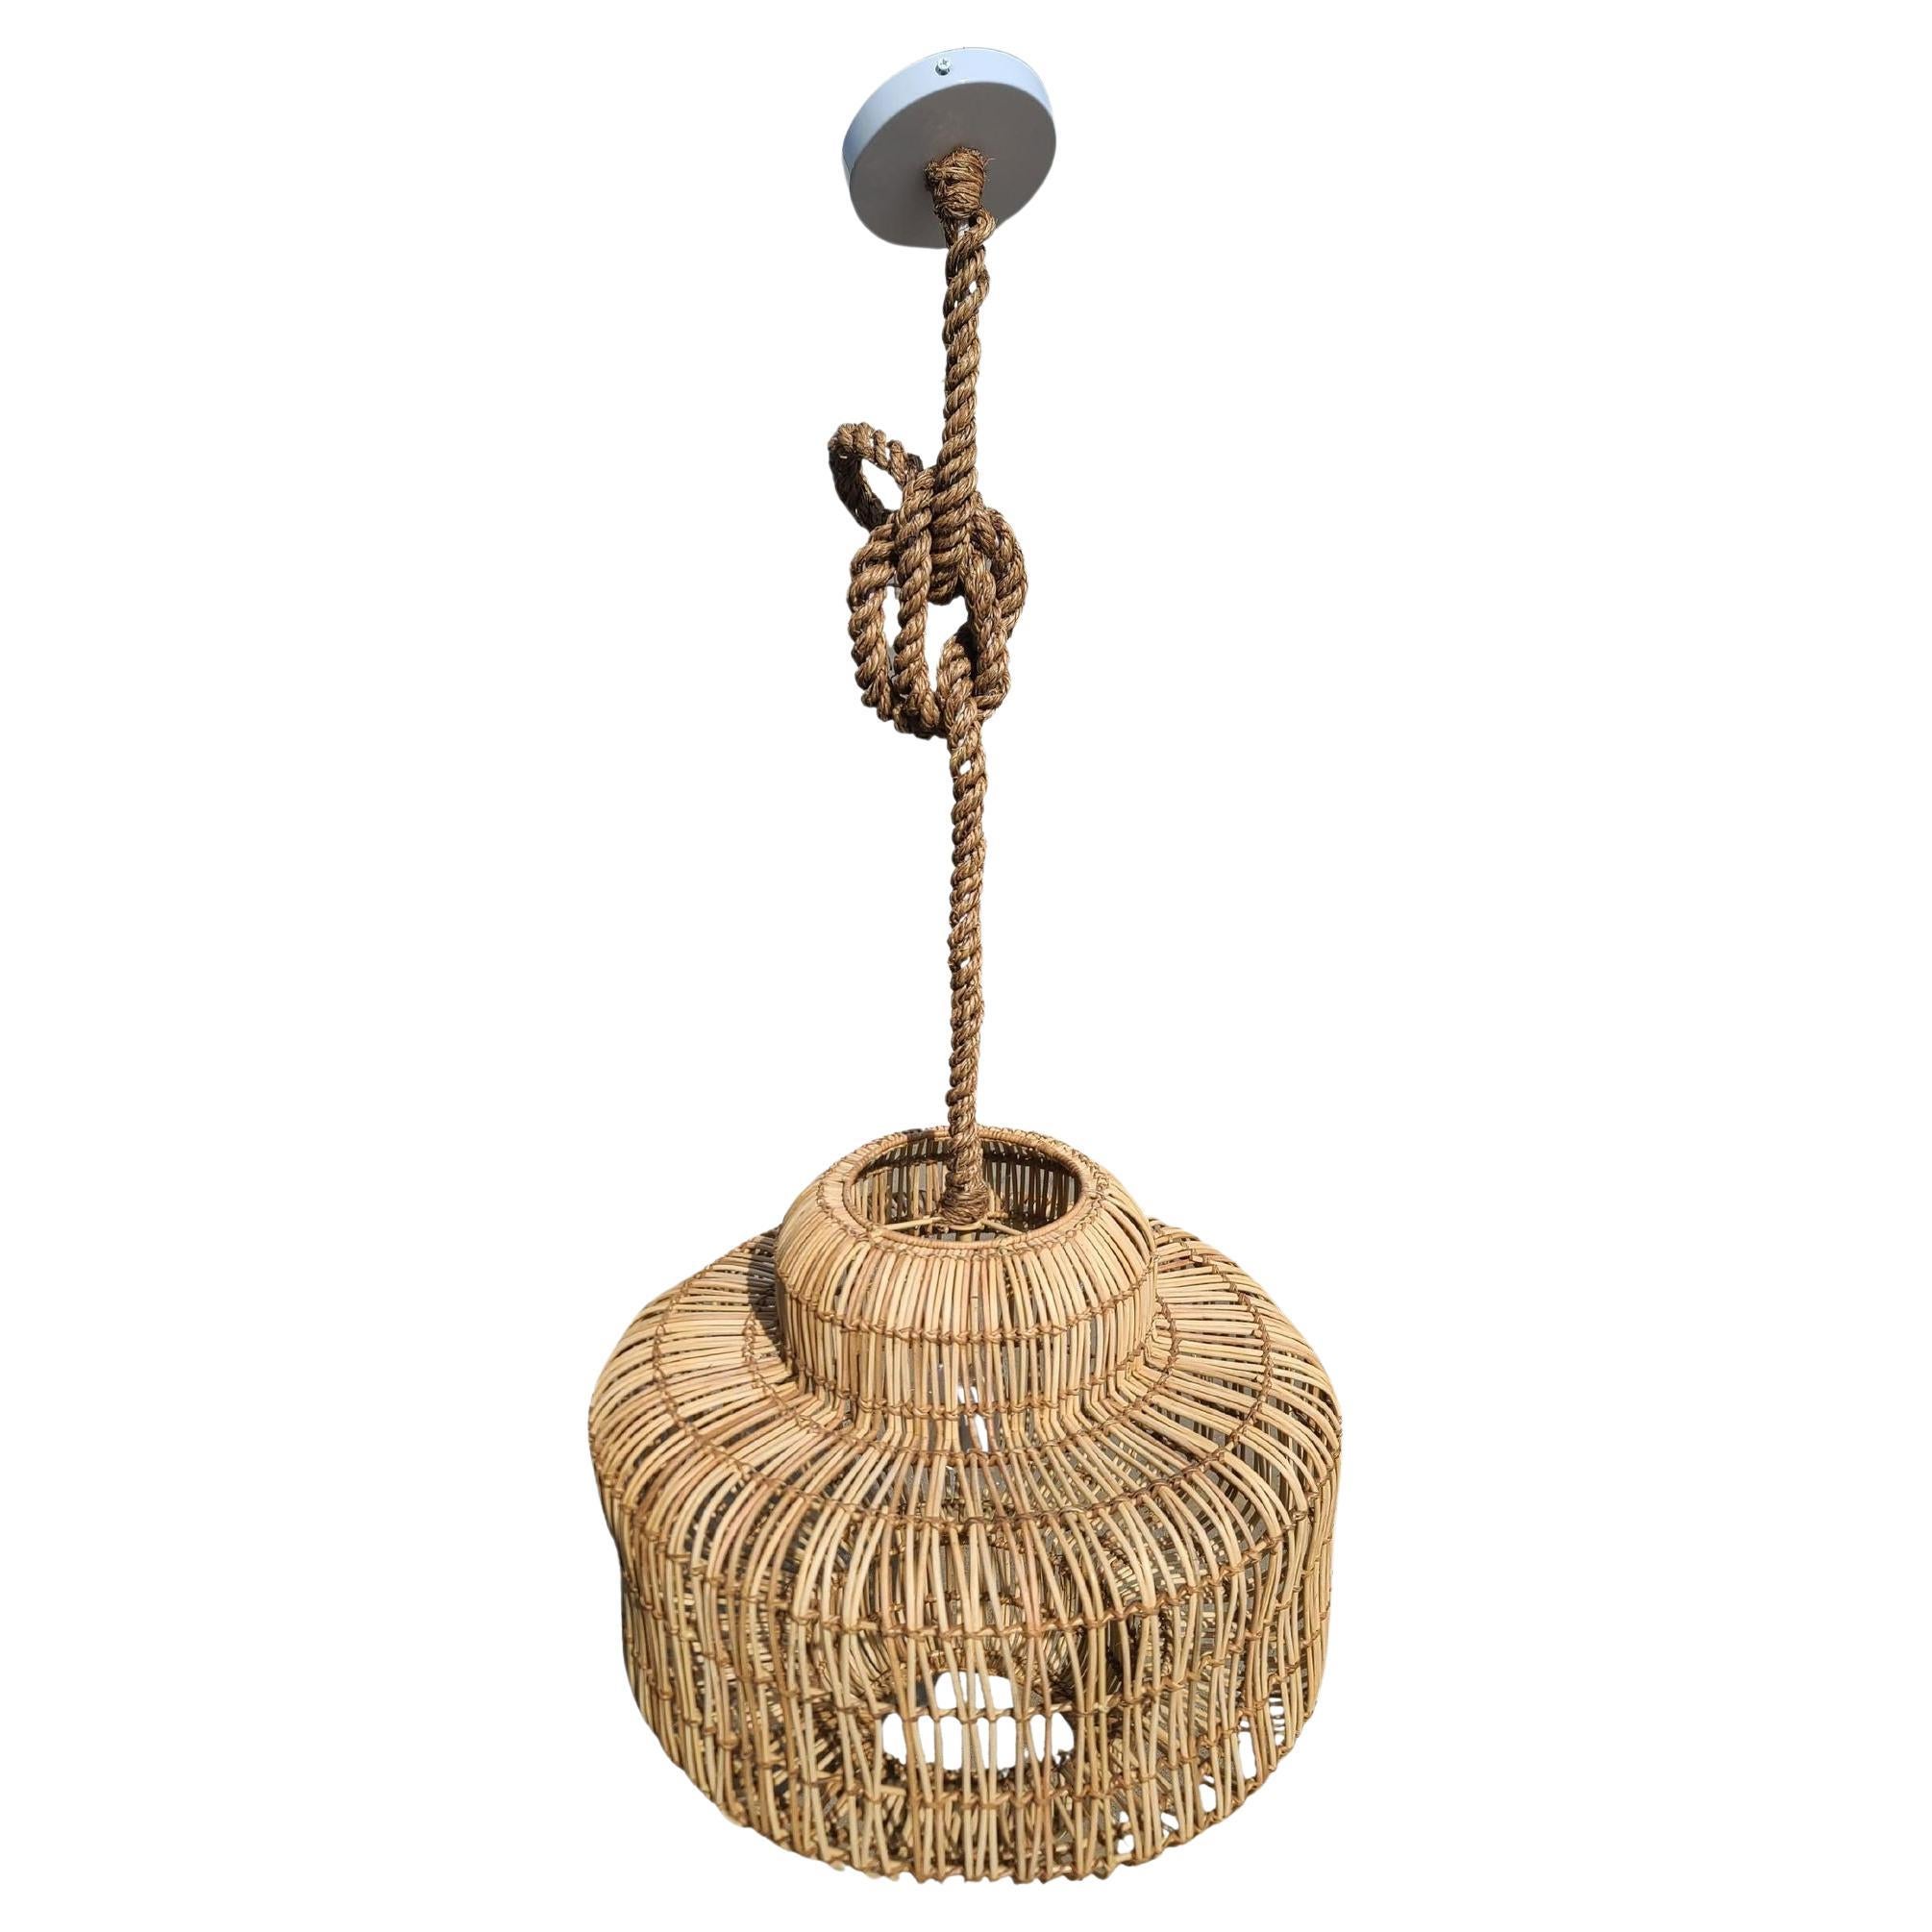 Stick Reed Rattan Hanging Ceiling Lamp w/ Bamboo Rope Cord